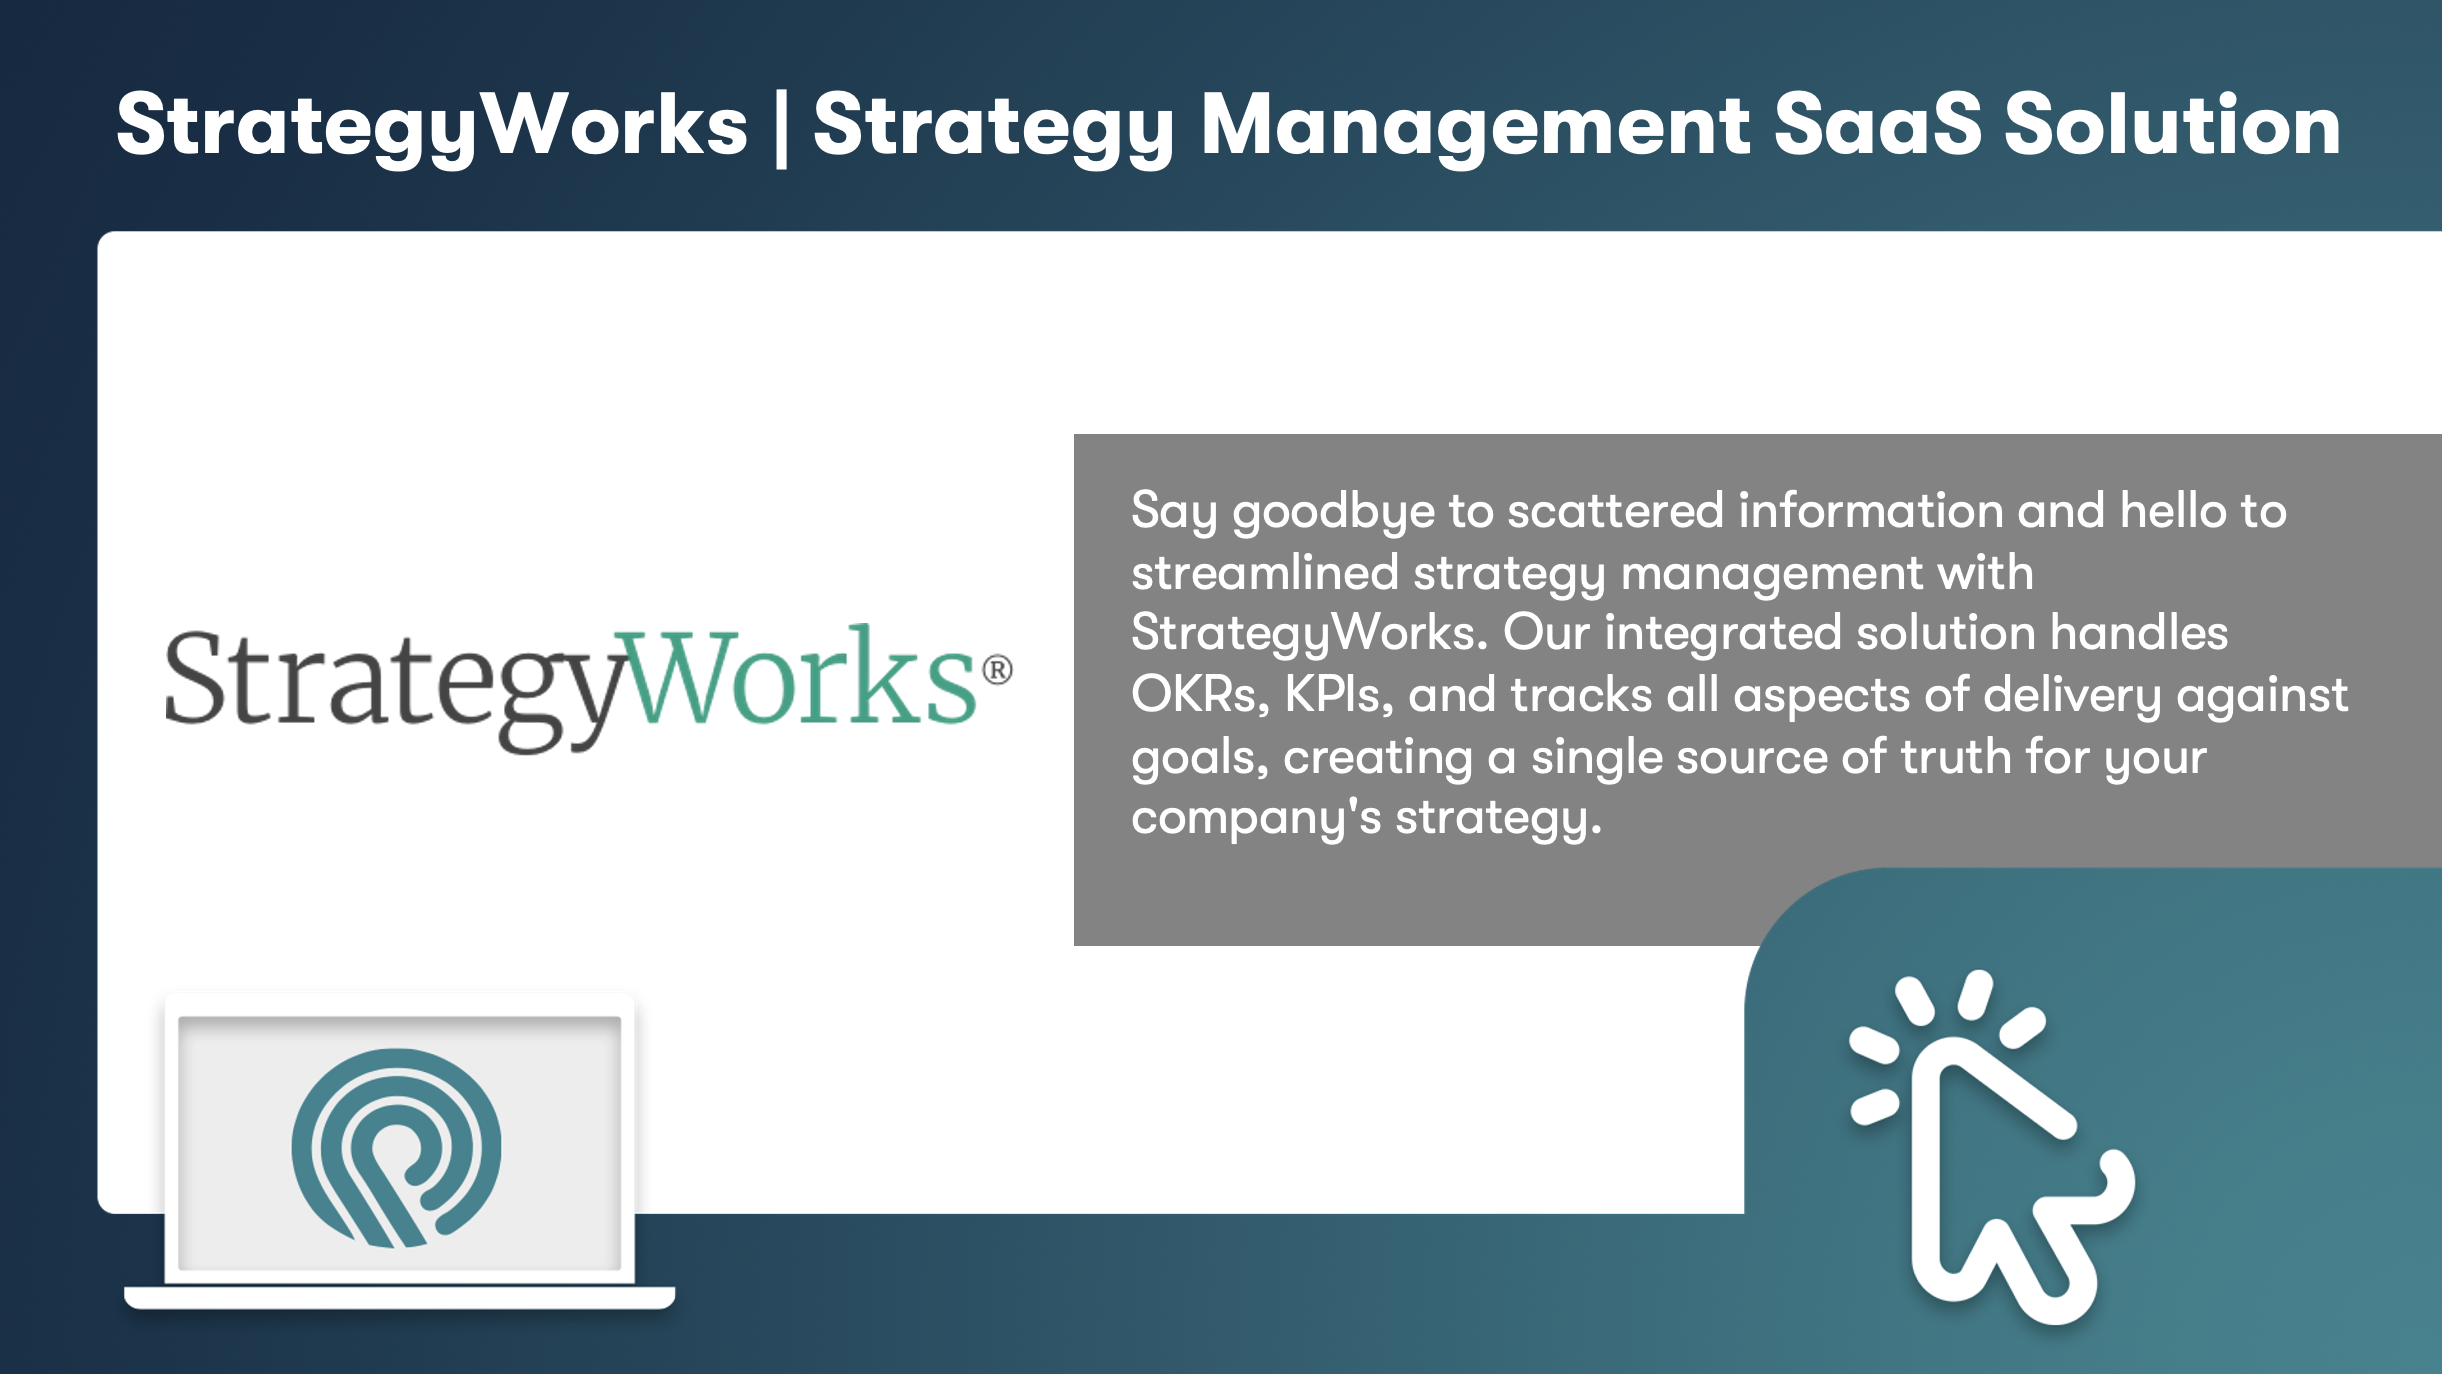 StrategyWorks | Strategy Management SaaS Solution